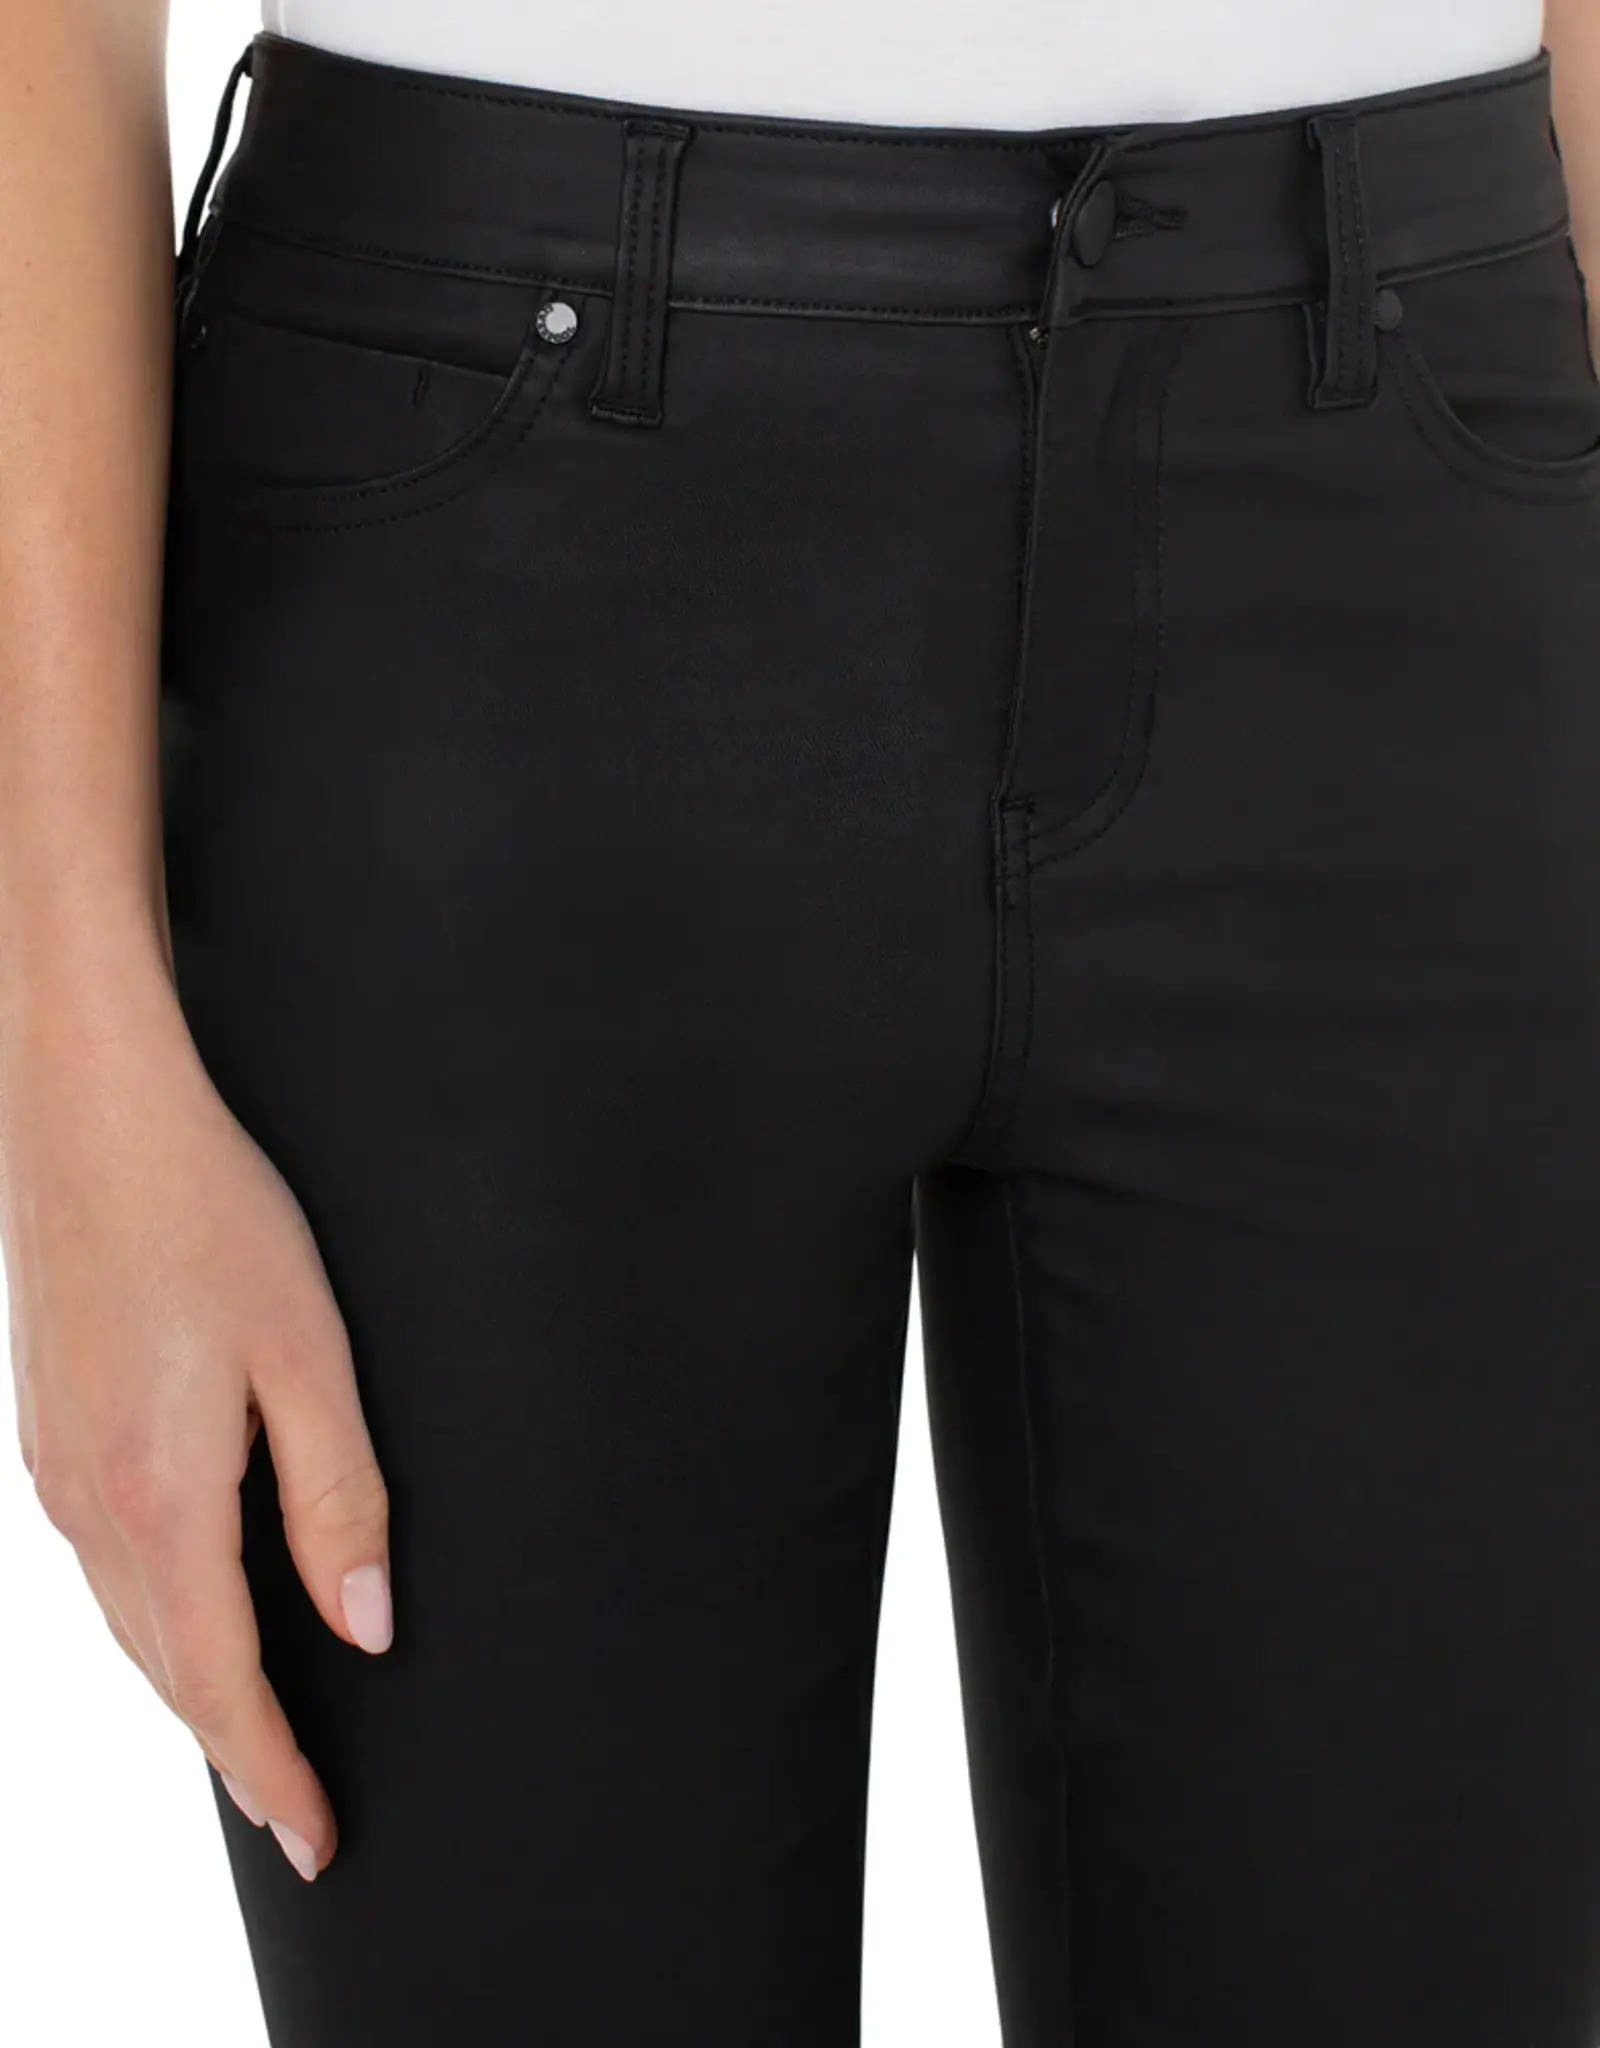 Liverpool Liverpool Hannah Cropped Flare Jean Black